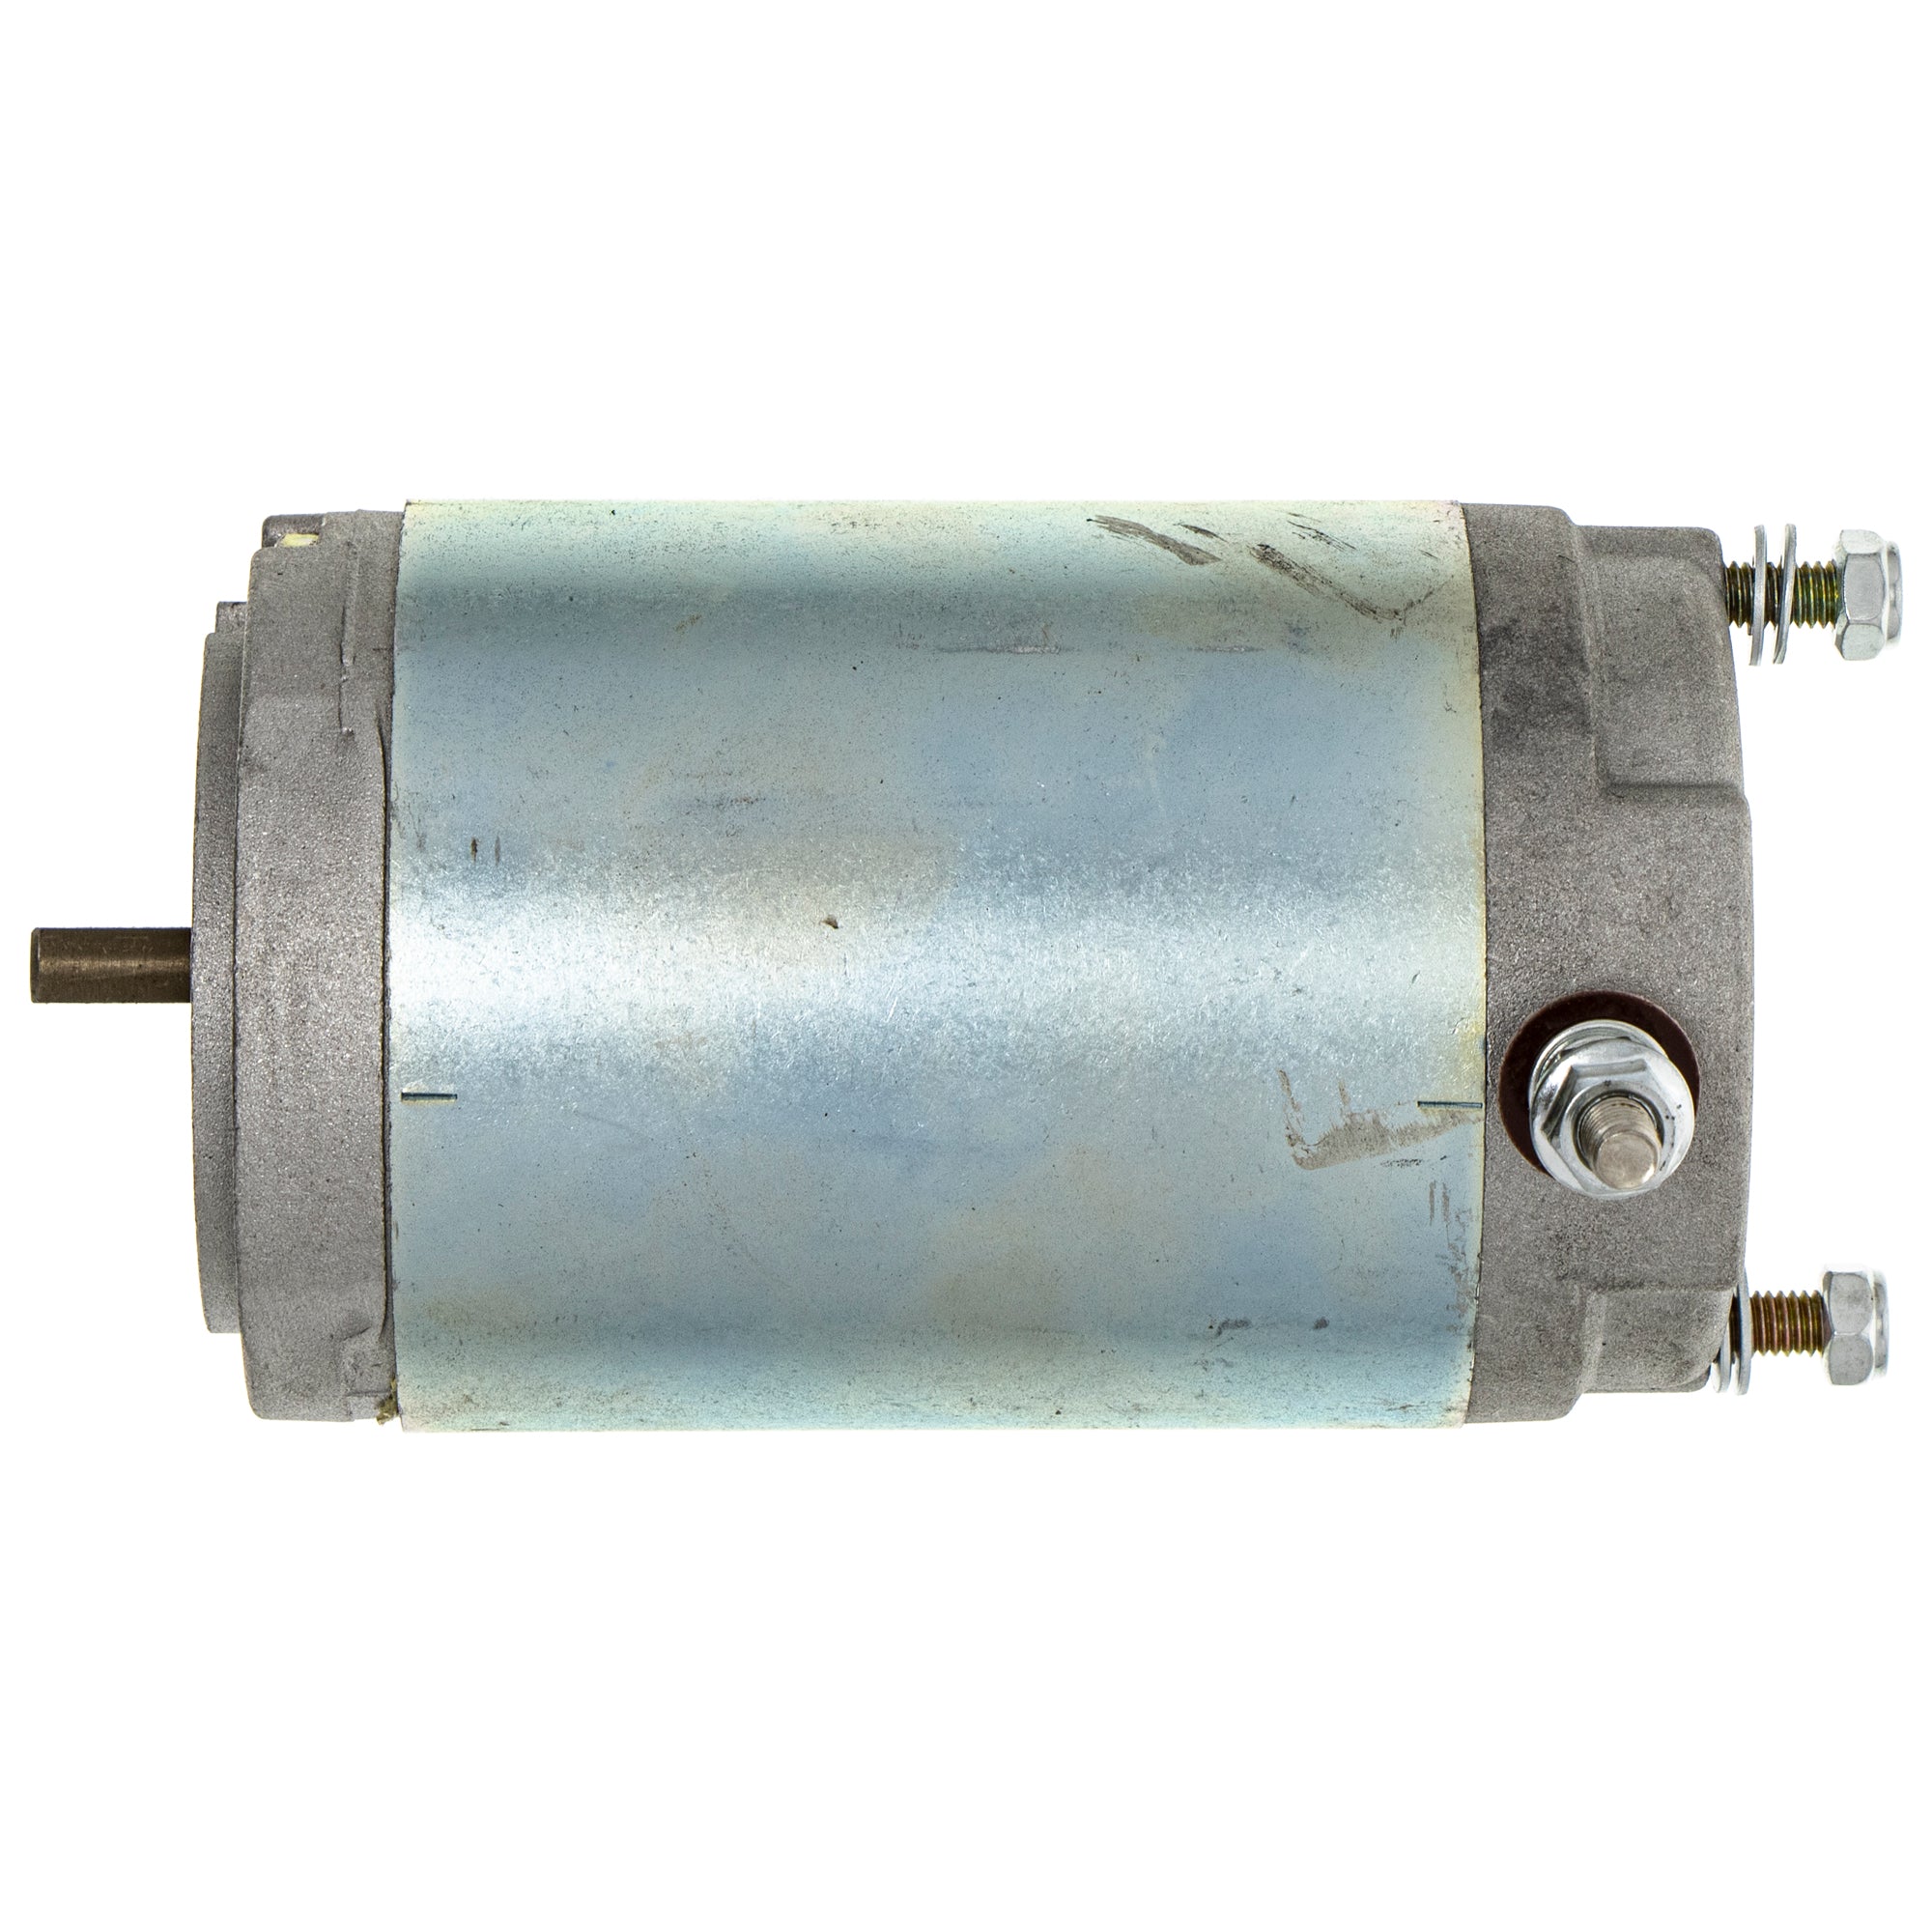 NICHE 519-CSM2348O Starter Motor Assembly for zOTHER Polaris Voyageur